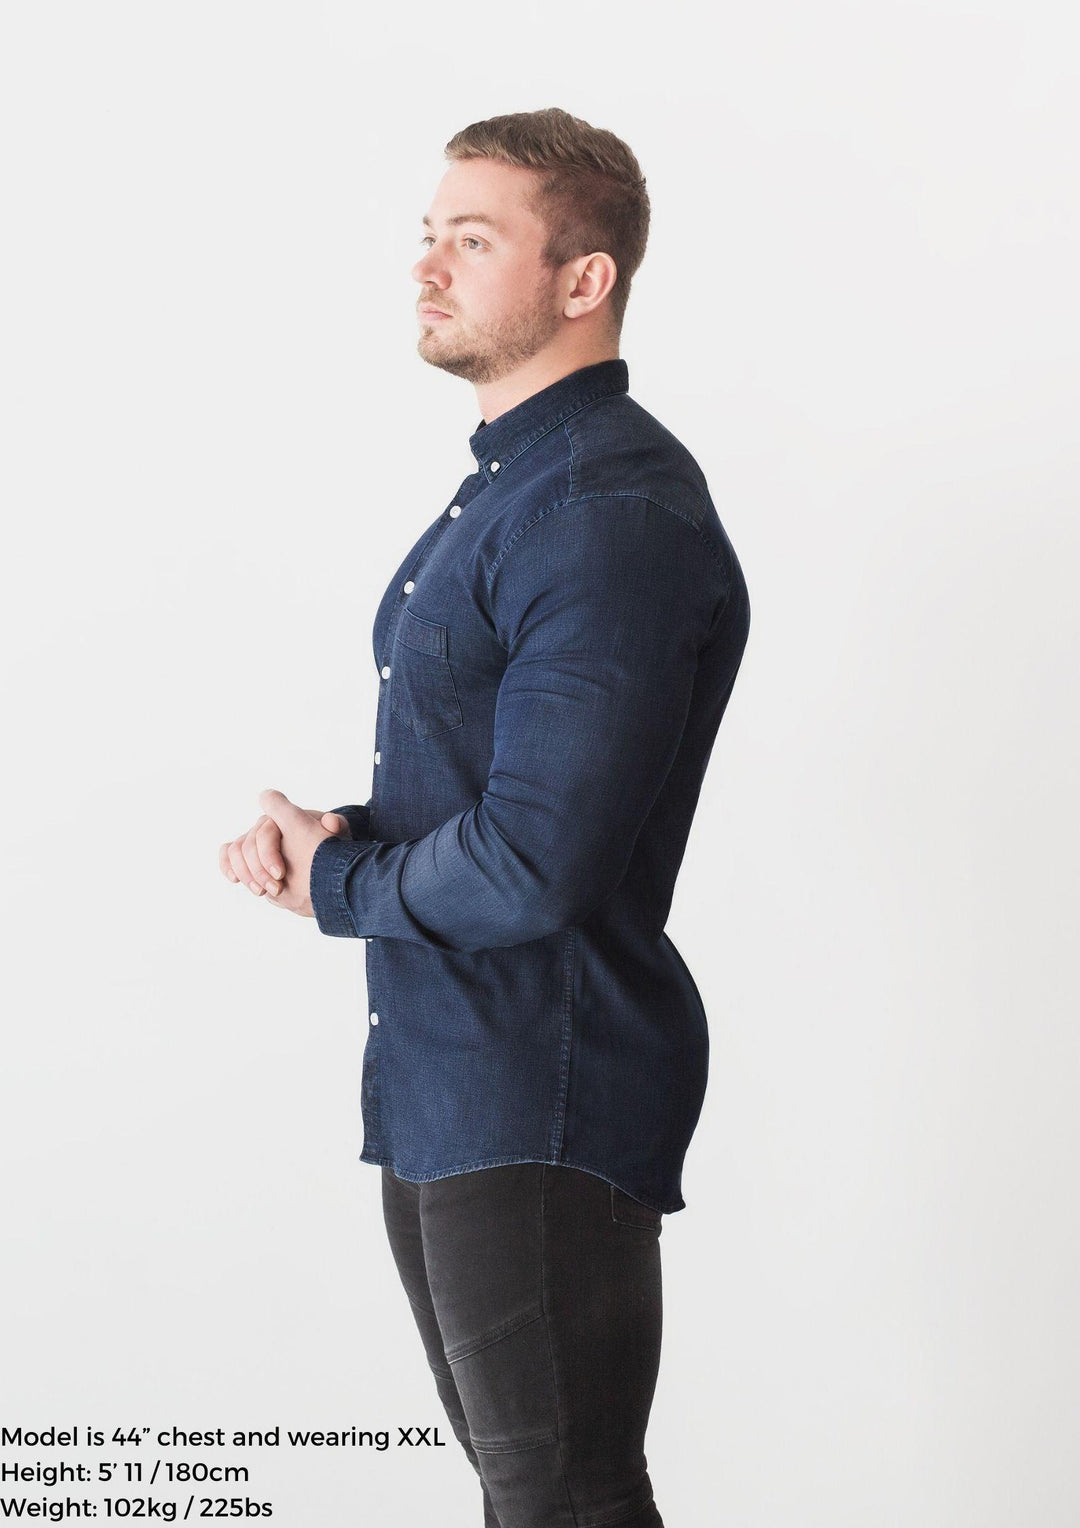 Navy Blue Denim Tapered Fit Shirt. A Proportionally Fitted and Denim Muscle Fit Shirt. Ideal for bodybuilders